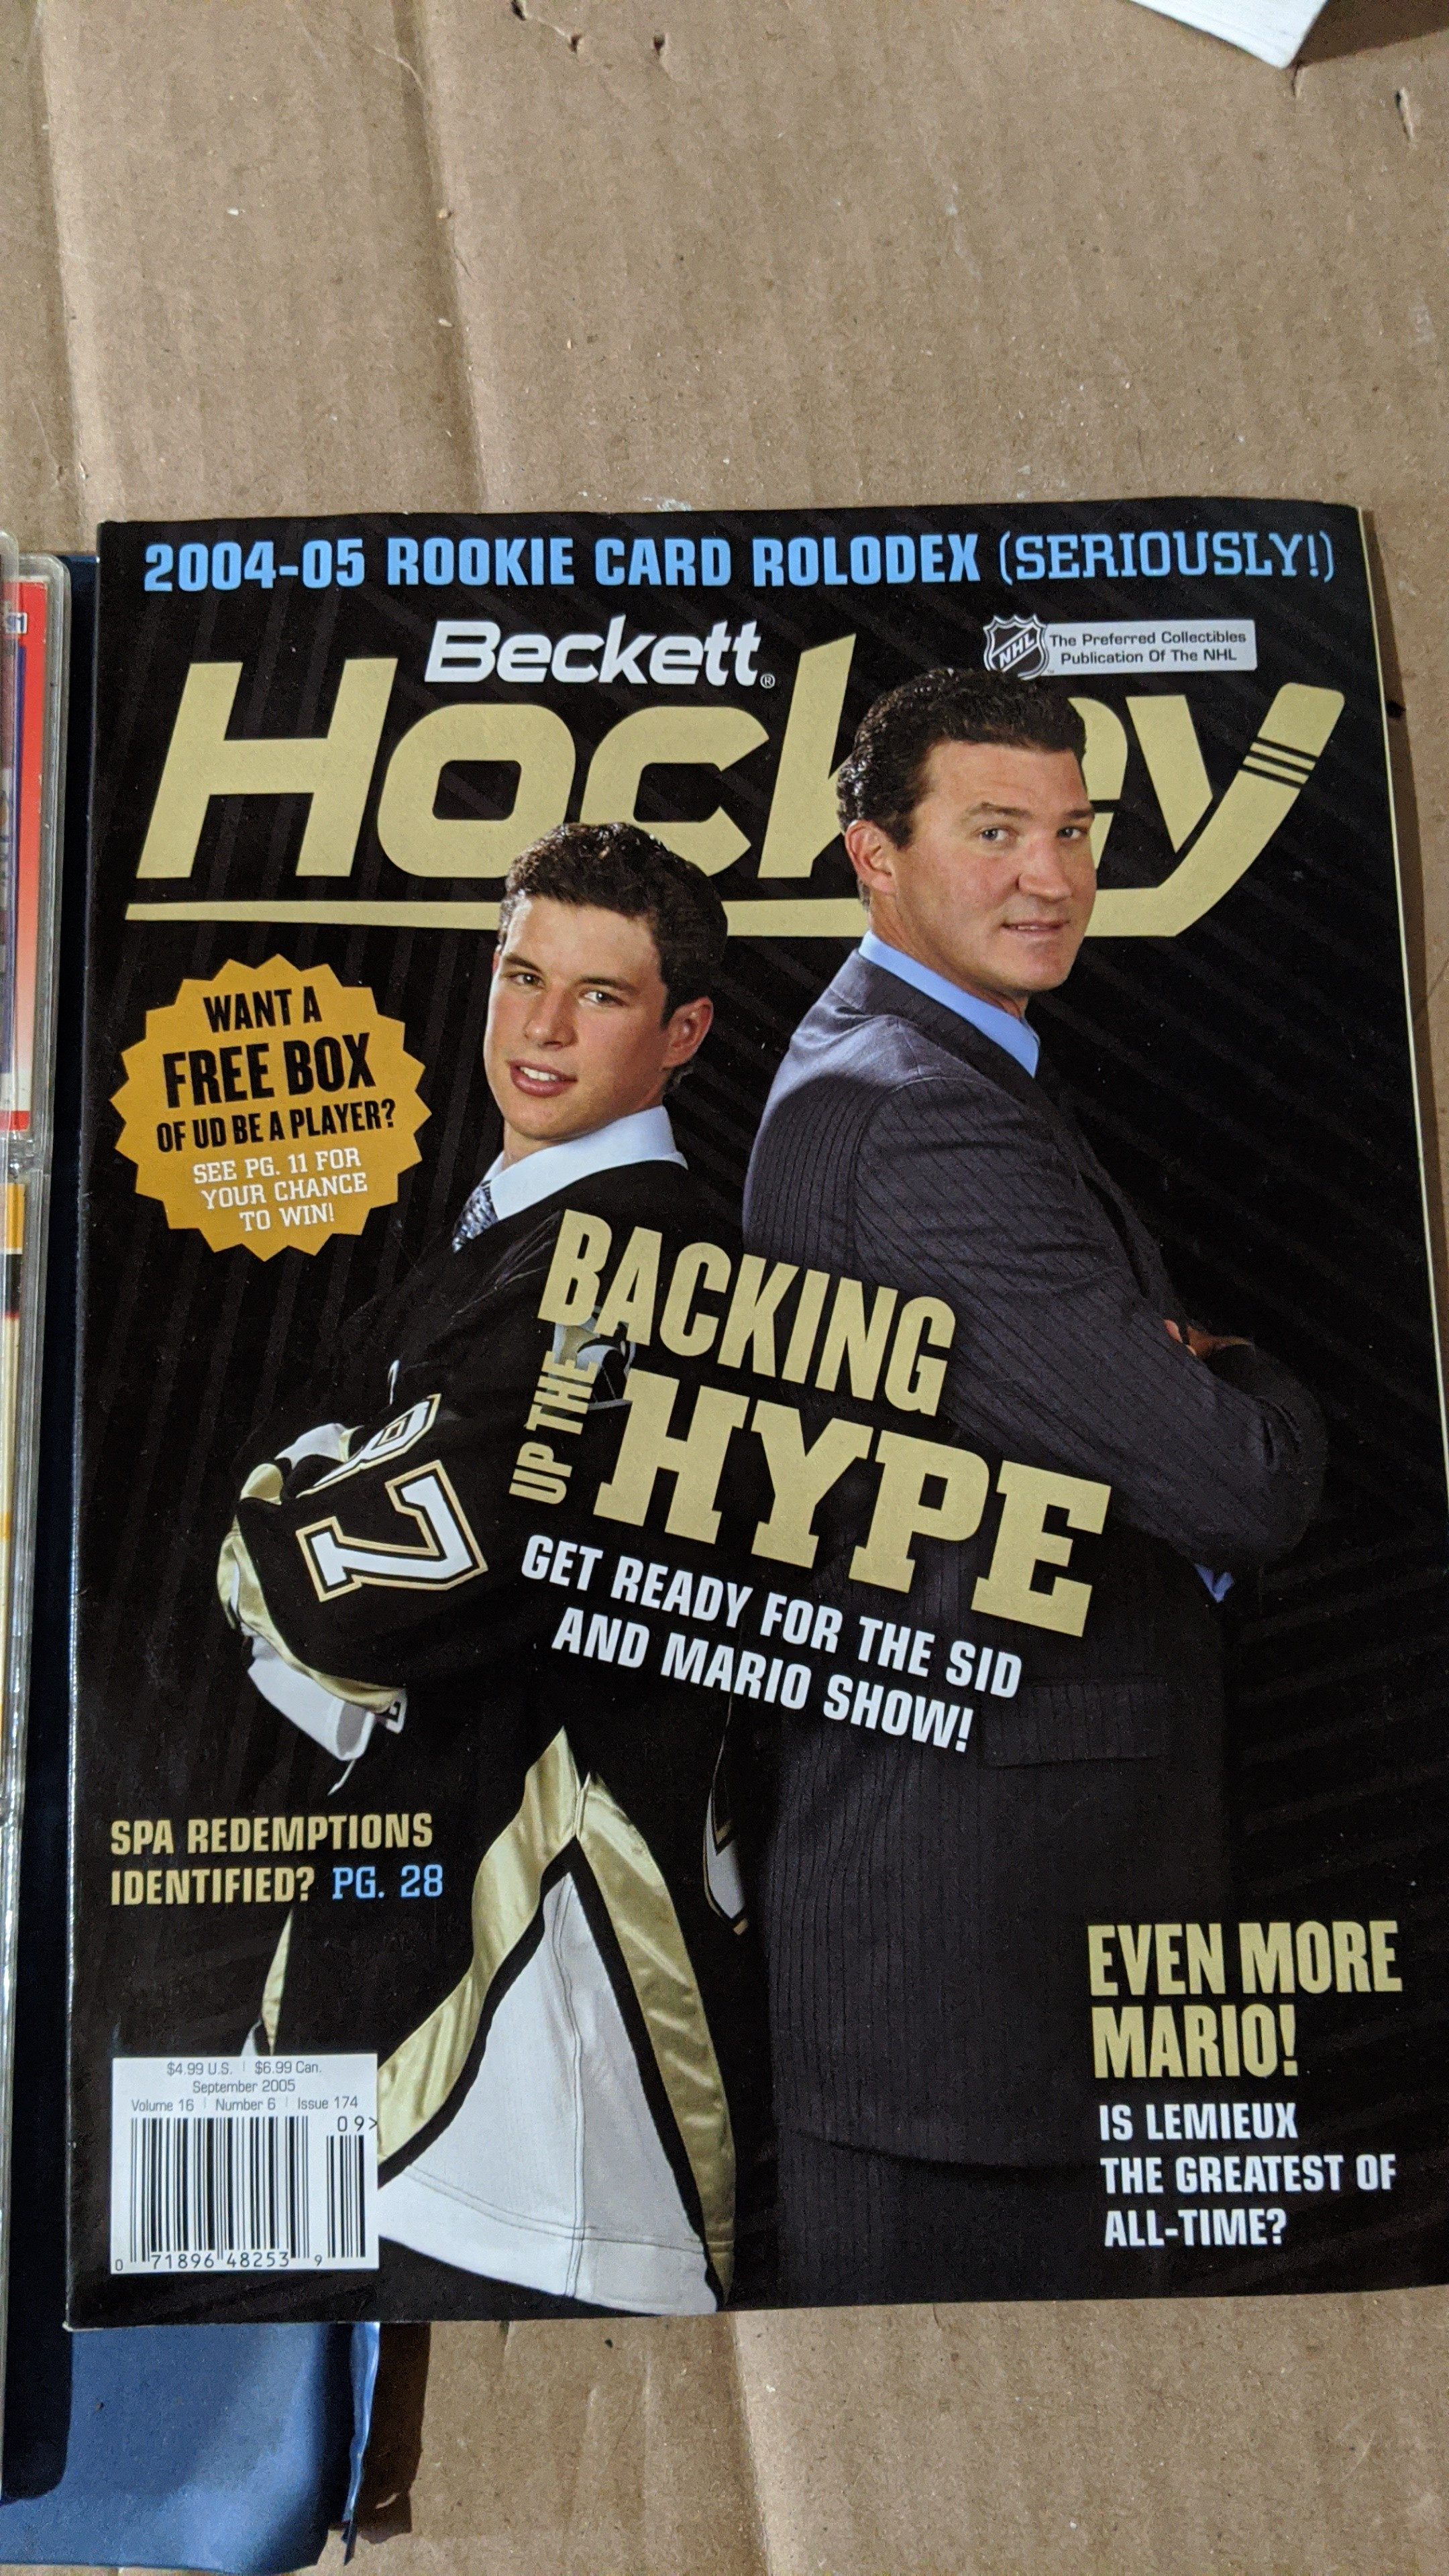 1984 THN cover story on Mario Lemieux. “Can he salvage the